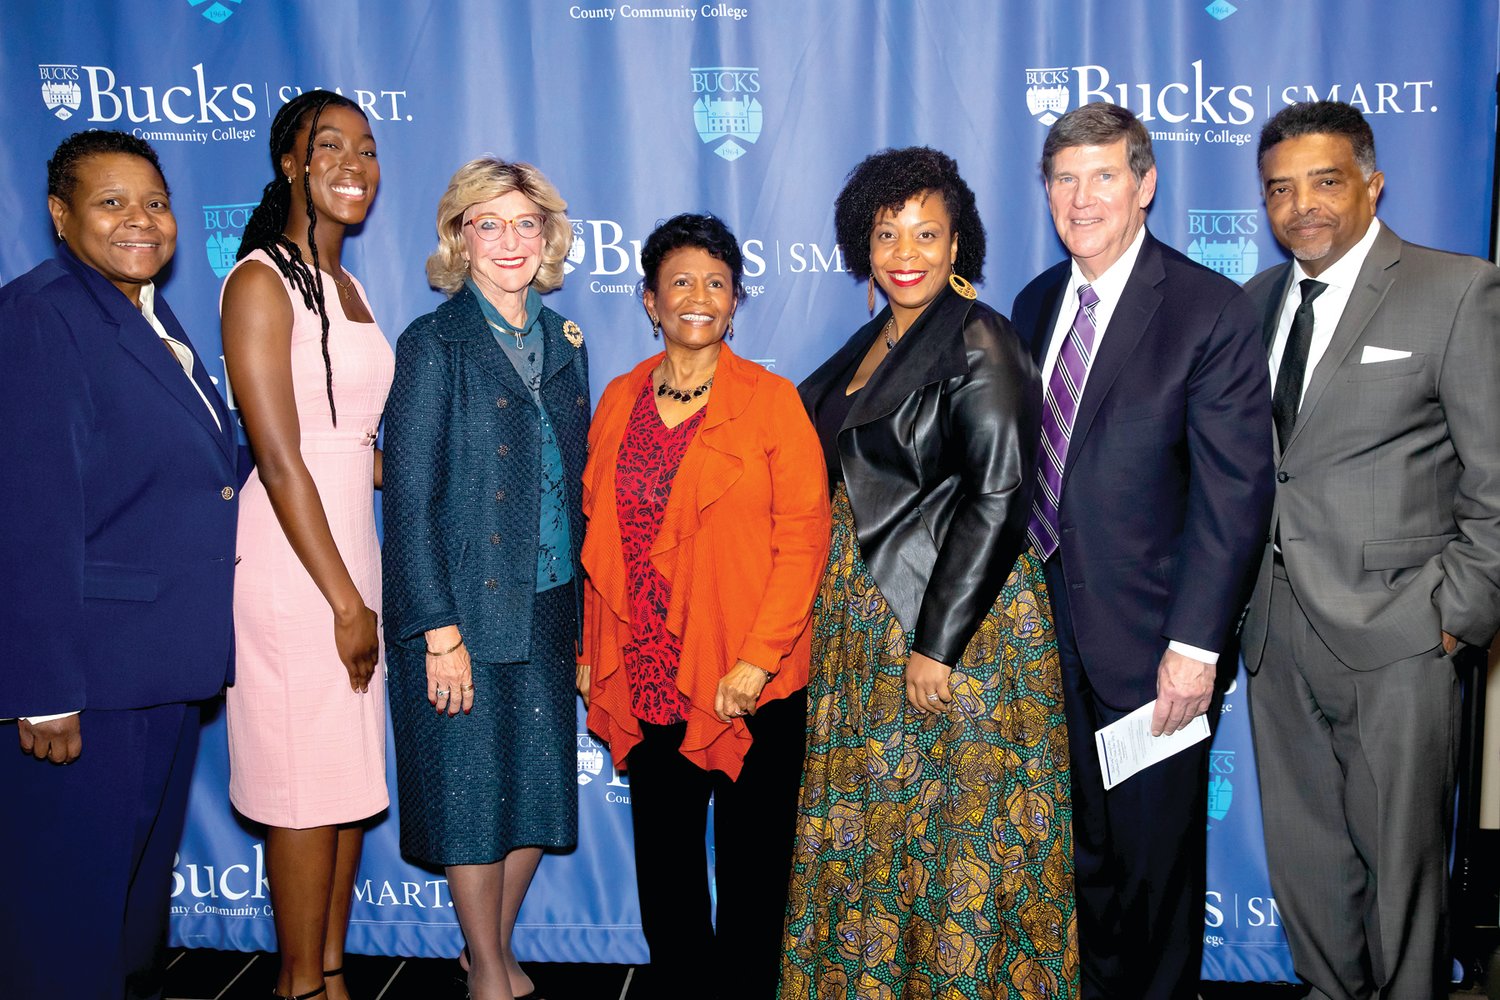 Bucks County Community College President Dr. Felicia Ganther, left, honored four leaders with the second annual Dr. Martin Luther King Jr. Dream Builder Awards for their dedication to nondiscrimination. They are, from second left, Student Dream Builder Lateefat Adewale of Croydon, Corporate Dream Builder Dr. Vail Garvin of Warminster, Humanitarian Dream Builder Karen Downer of Bensalem, and Community Dream Builder Adrienne King of Perkasie. Joining in congratulating the awardees are board of trustees Chair Tom Jennings and Associate Vice President Kevin Antoine.